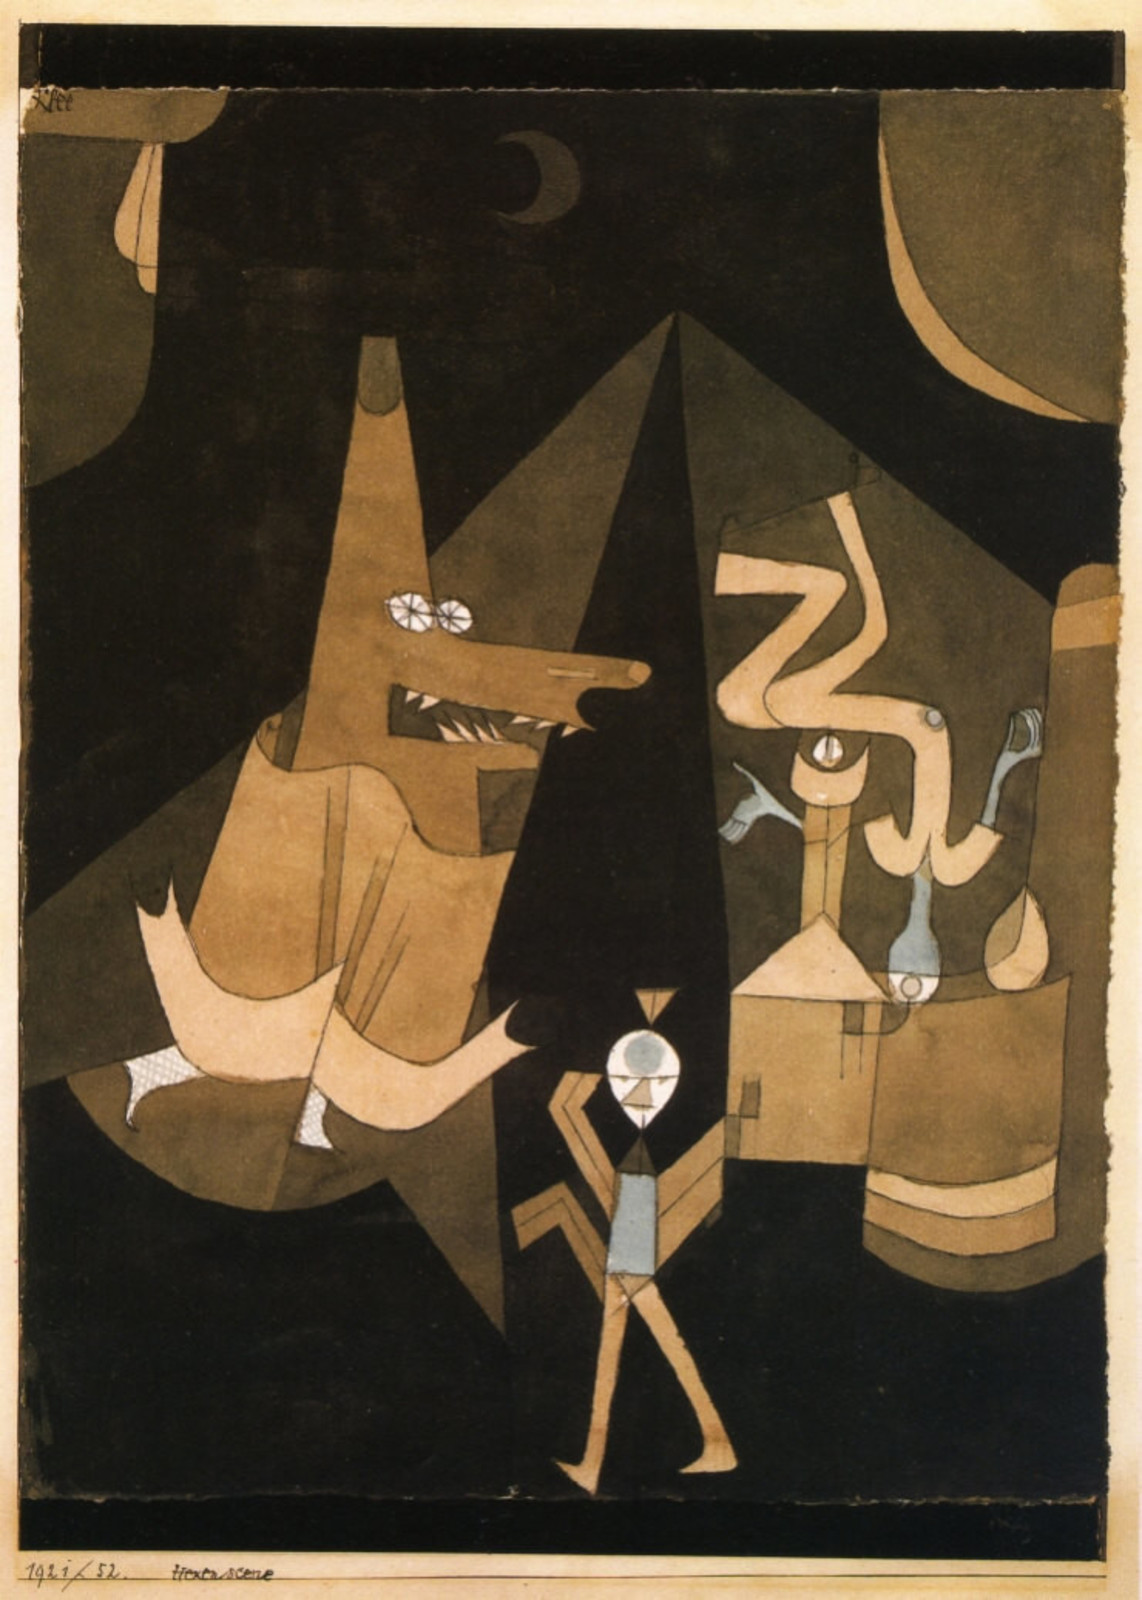 Paul Klee. Witch Scene. 1921. Oil on canvas. 32 x 24.35 cm. Private collection